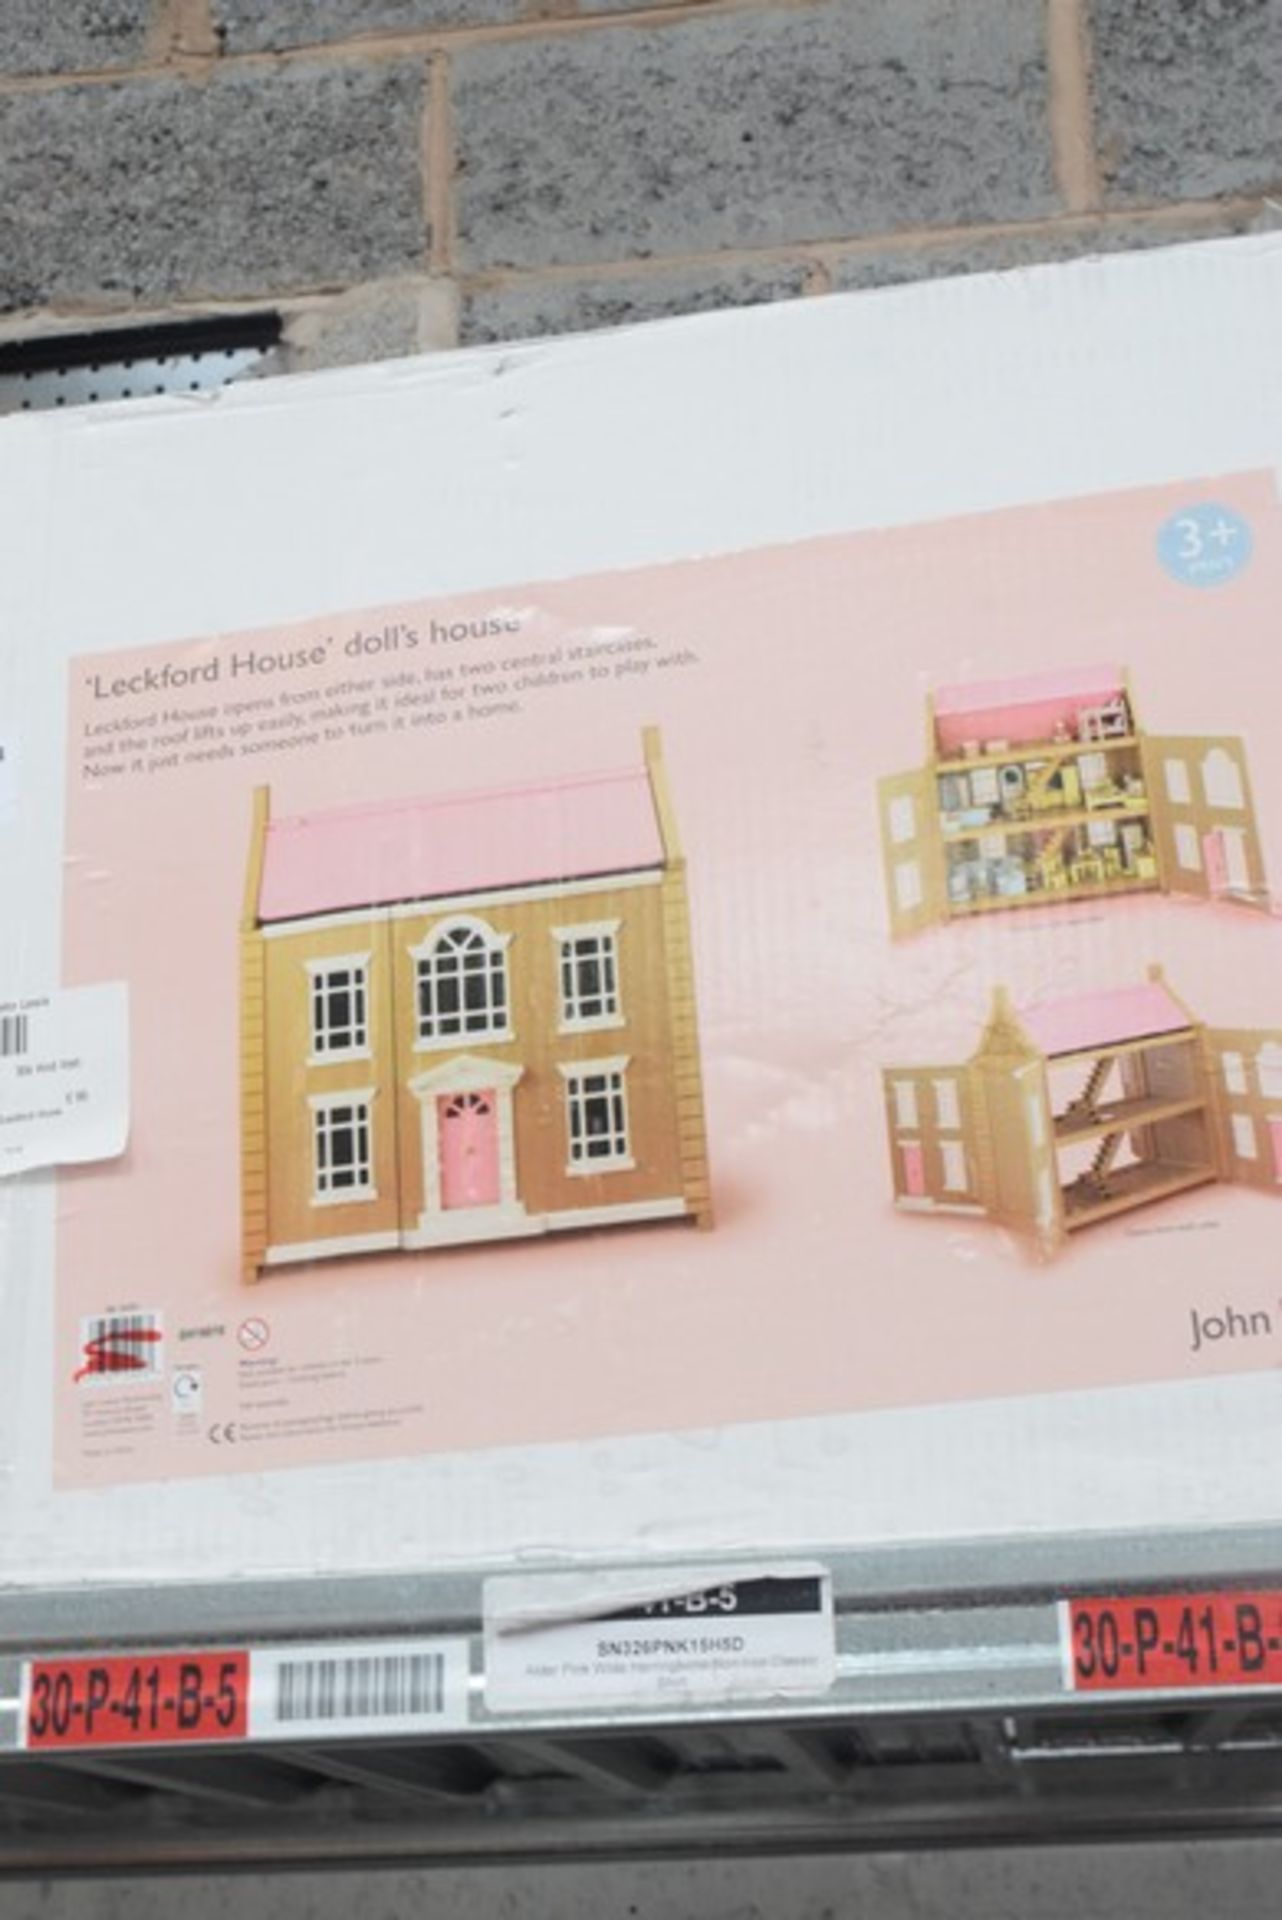 1 x BOXED WOODEN DOLLS HOUSE LETCHFORD HOUSE RRP £95 24.07.17 *PLEASE NOTE THAT THE BID PRICE IS